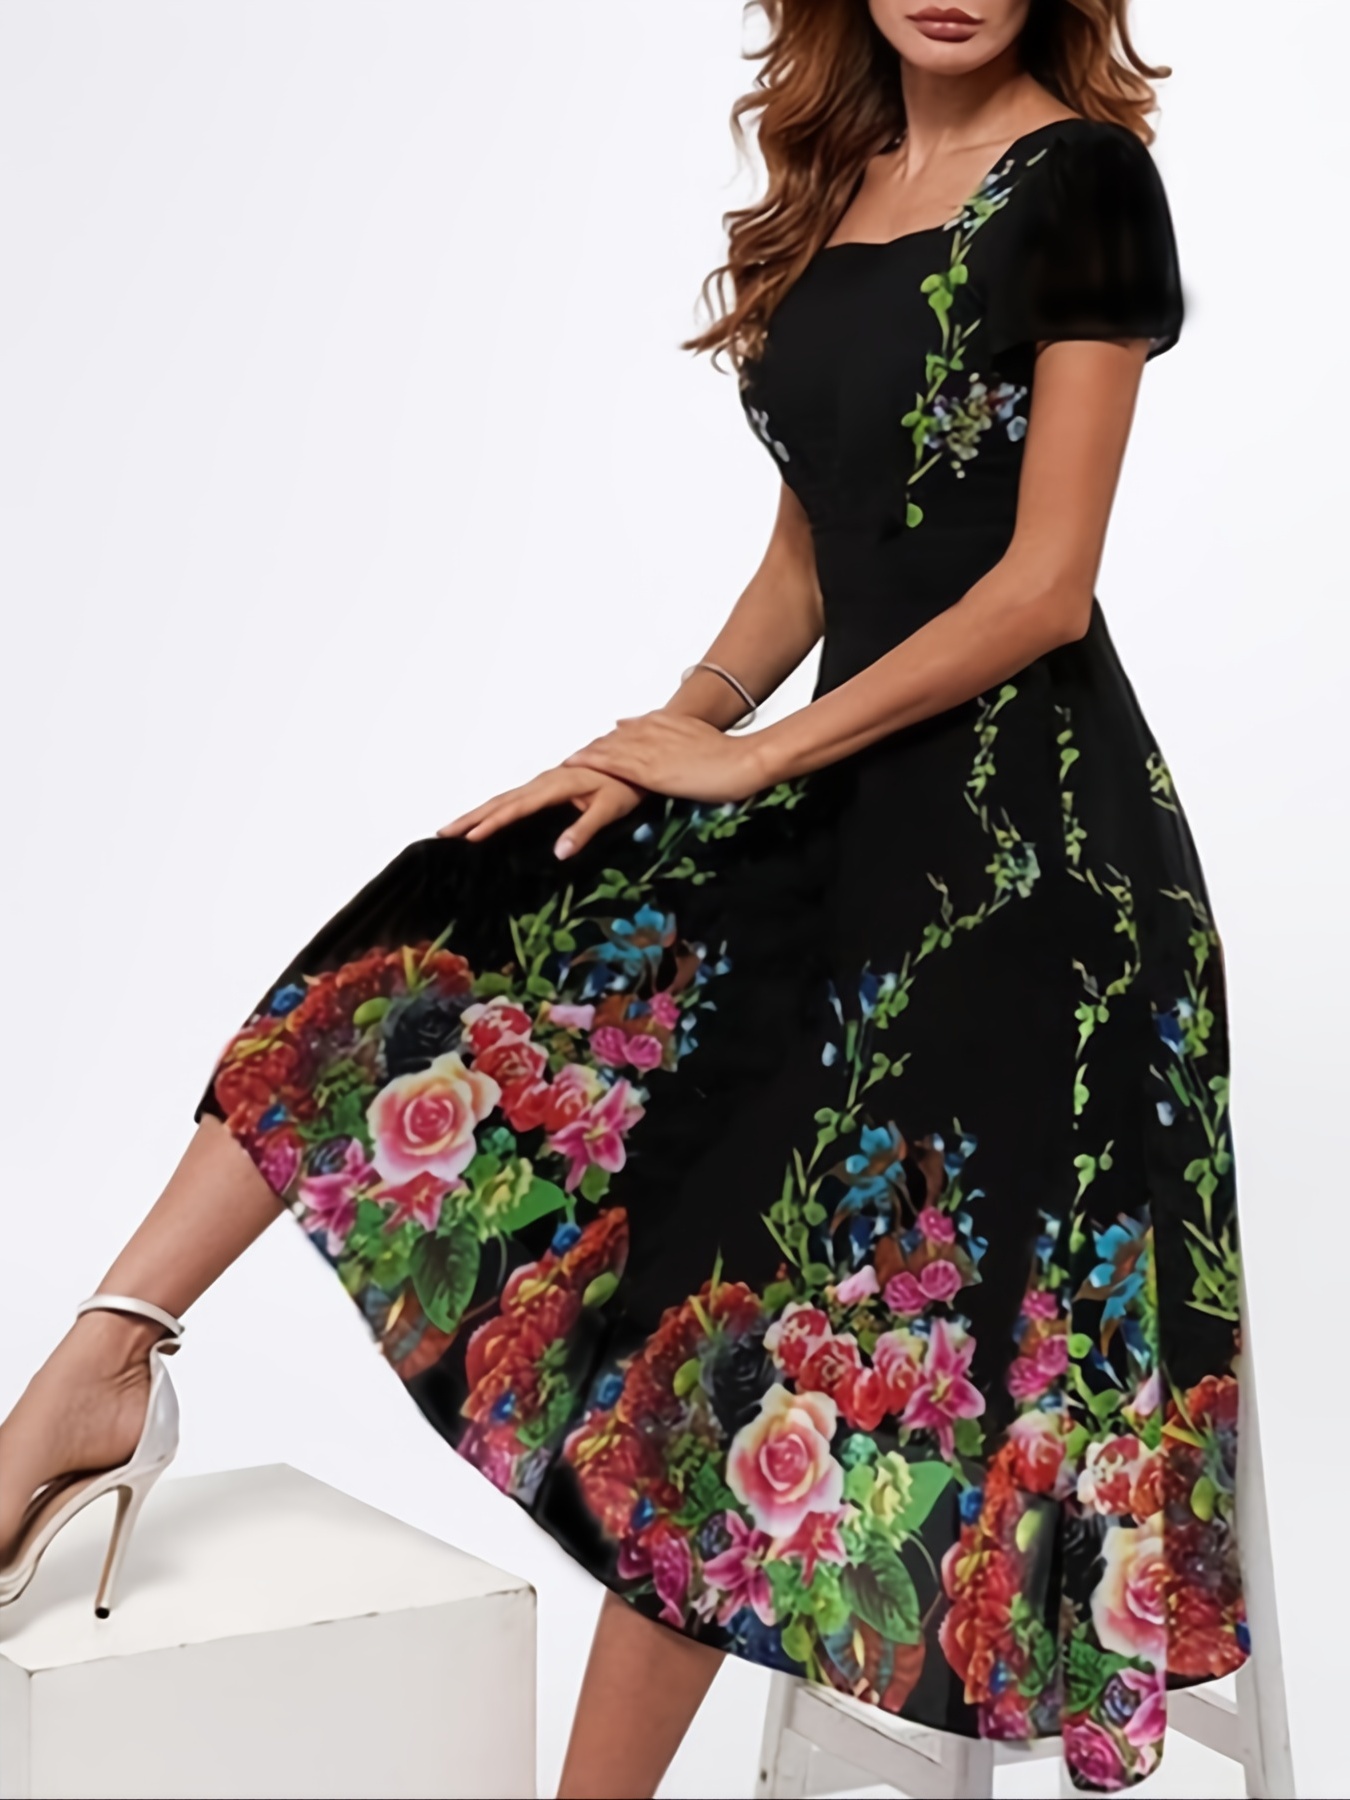 Floral Ruched Dress  Classy outfits, Red and black outfits, Event dresses